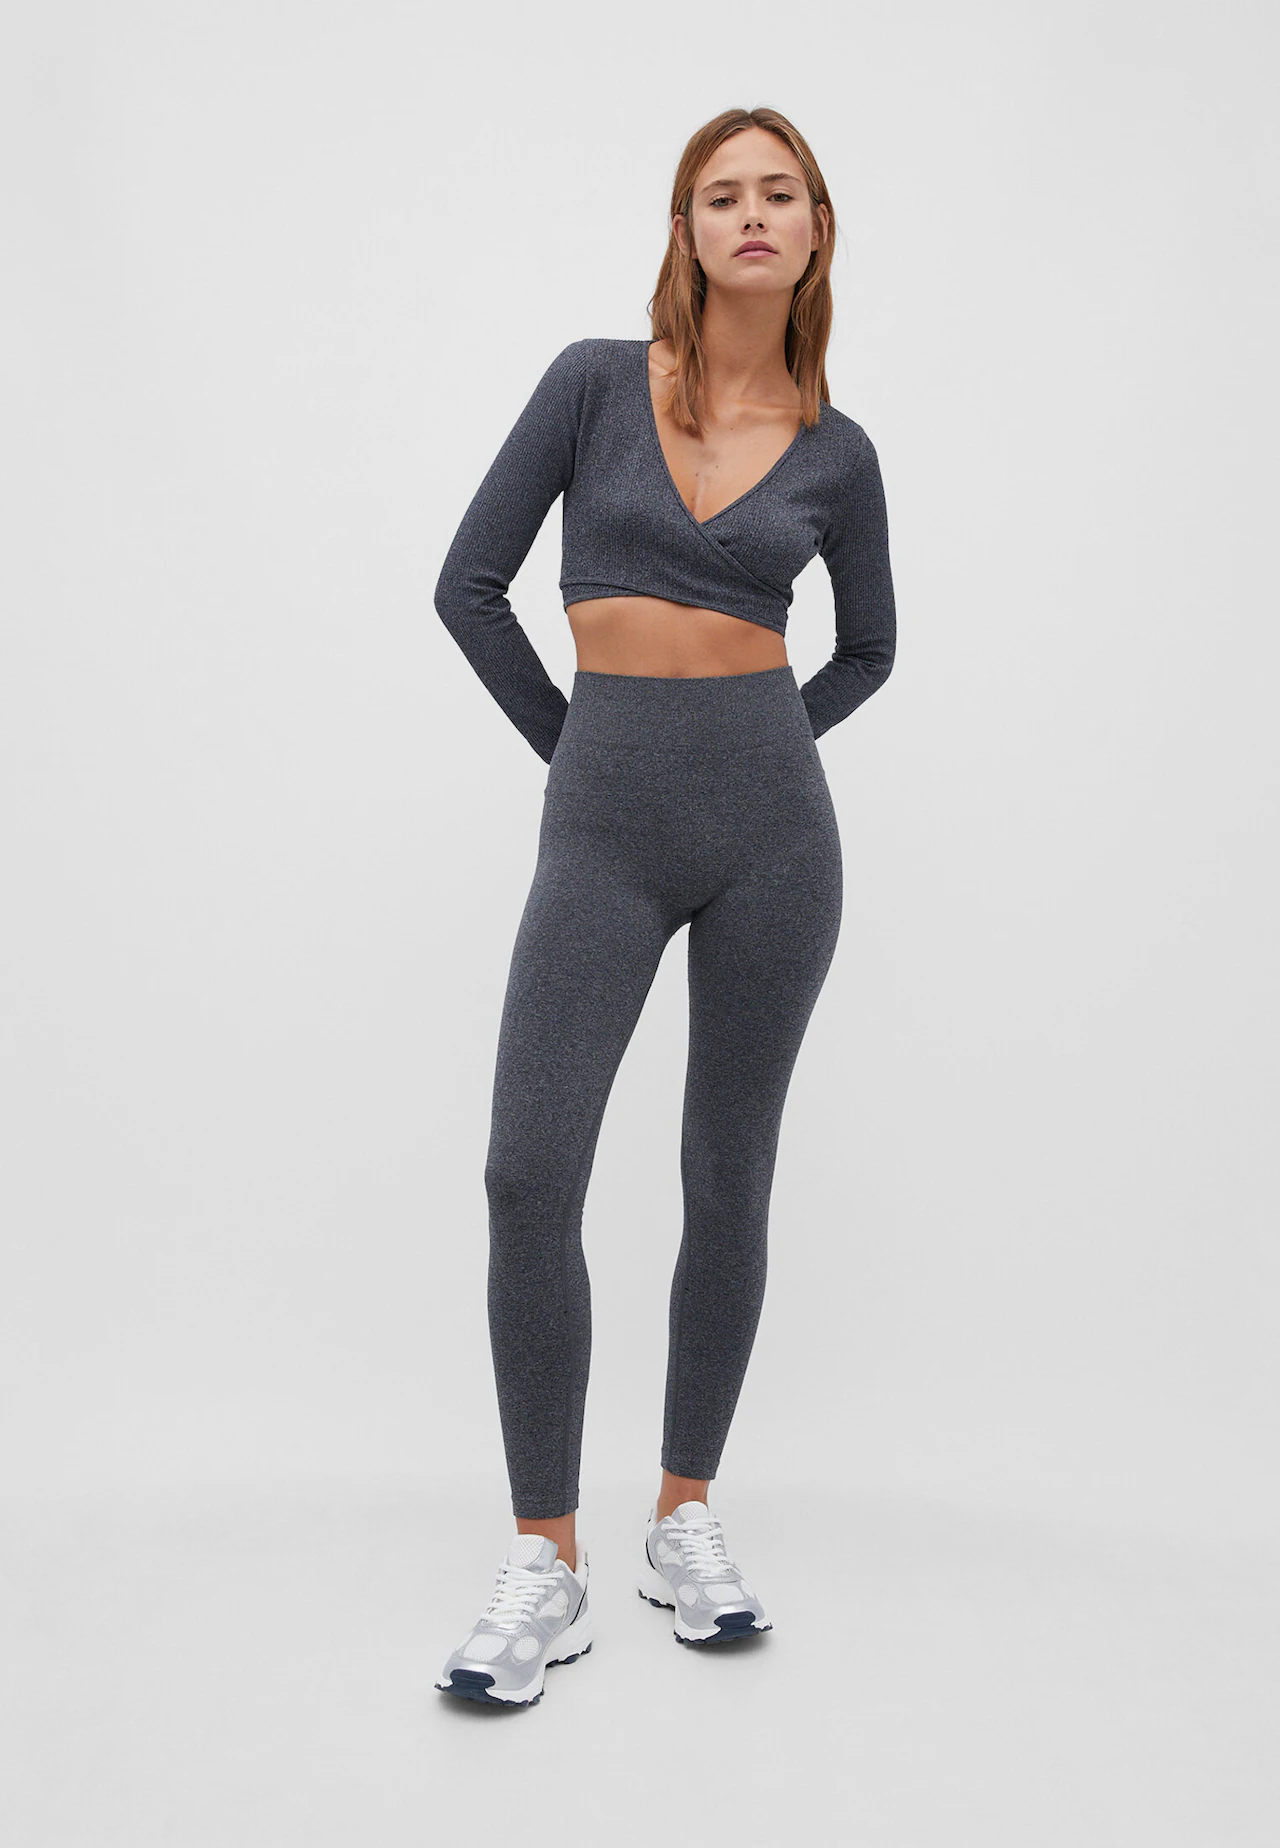 seamless sport leggings, seamless sport leggings Suppliers and